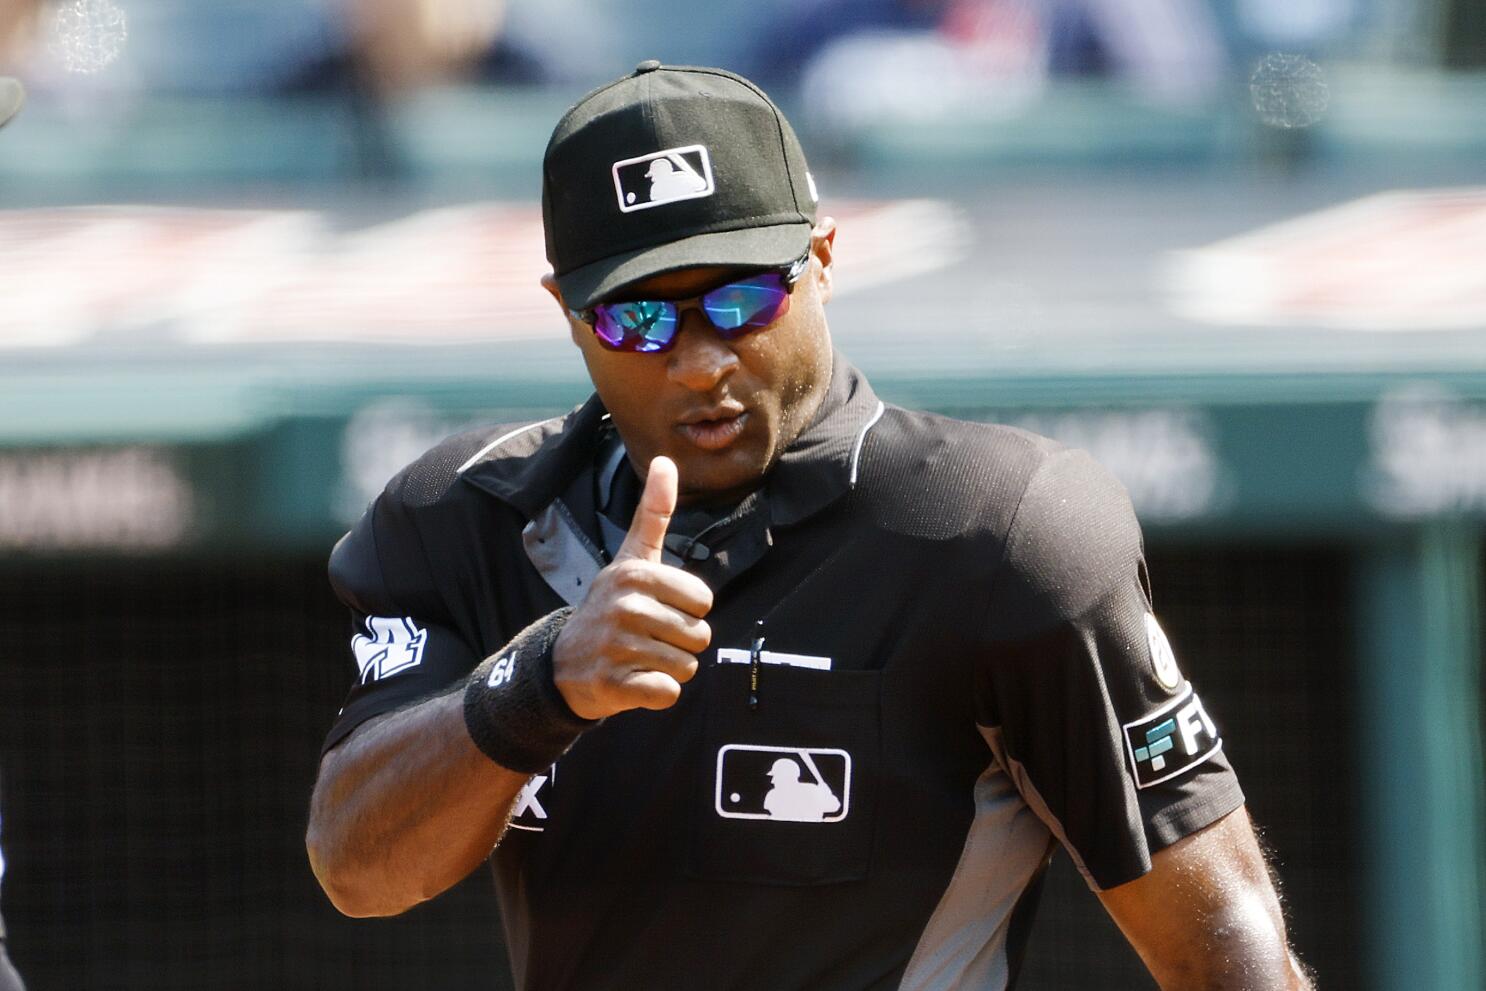 Porter, Johnson become MLB's 2nd, 3rd Black ump crew chiefs - The